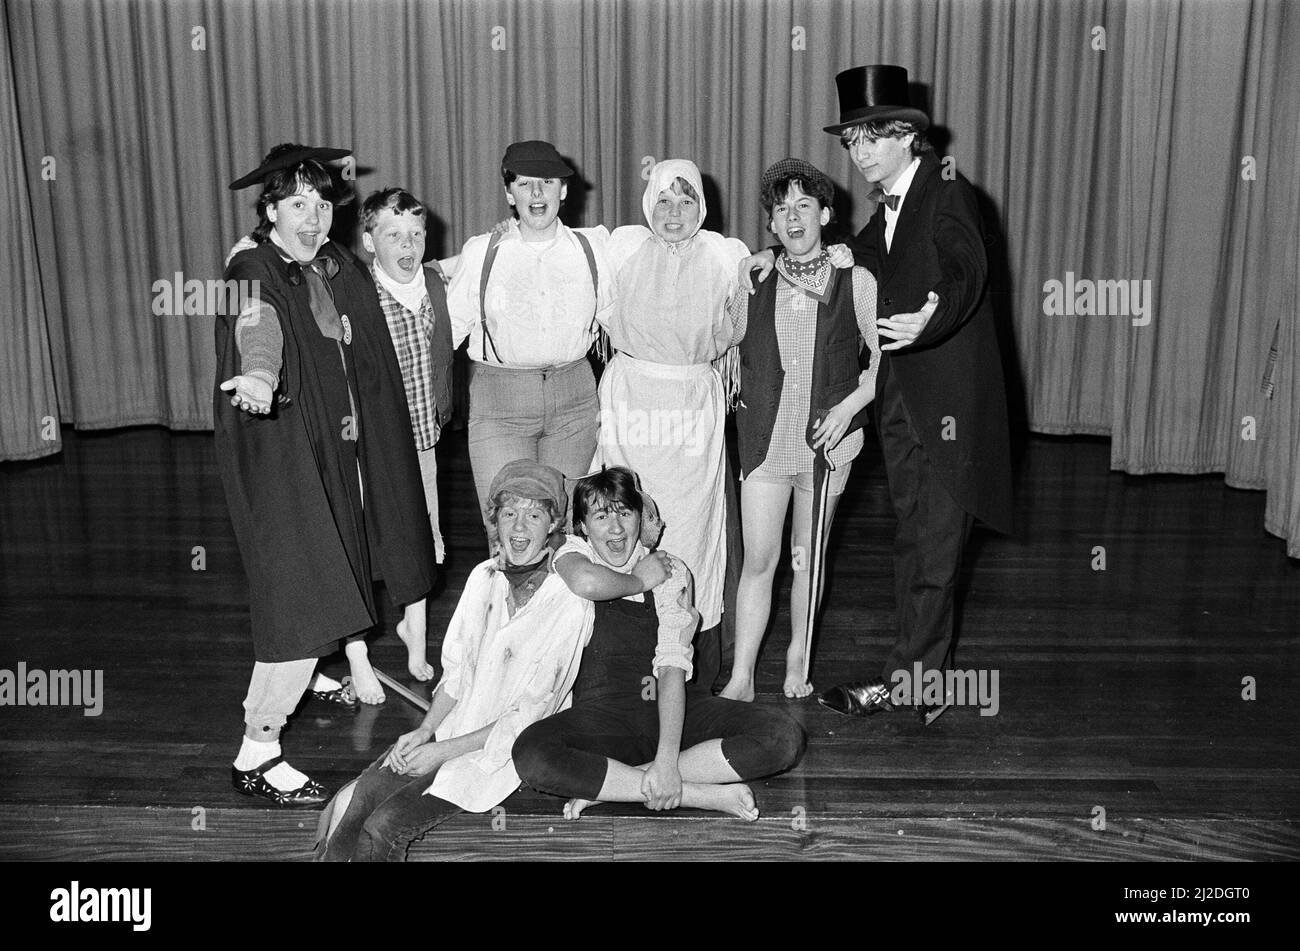 Young Amy Taylor in the guise of Tom Sawyer (front right) and Vanessa Pearson, as Huckleberry Finn (left), take the stage for a two-night production of Tom Sawyer by St John¿ Church drama group, Golcar, at the church school. Also pictured are other members of the 20-strong cast. They are (from left) Anne Phillips, James Taylor, Claire Johnson, Jill Wood, Anne Davies and Tom Taylor. The drama group was specially formed for this production, to raise money for the Martin House children¿ hospice at Boston Spa, near Tadcaster. 7th May 1986. Stock Photo